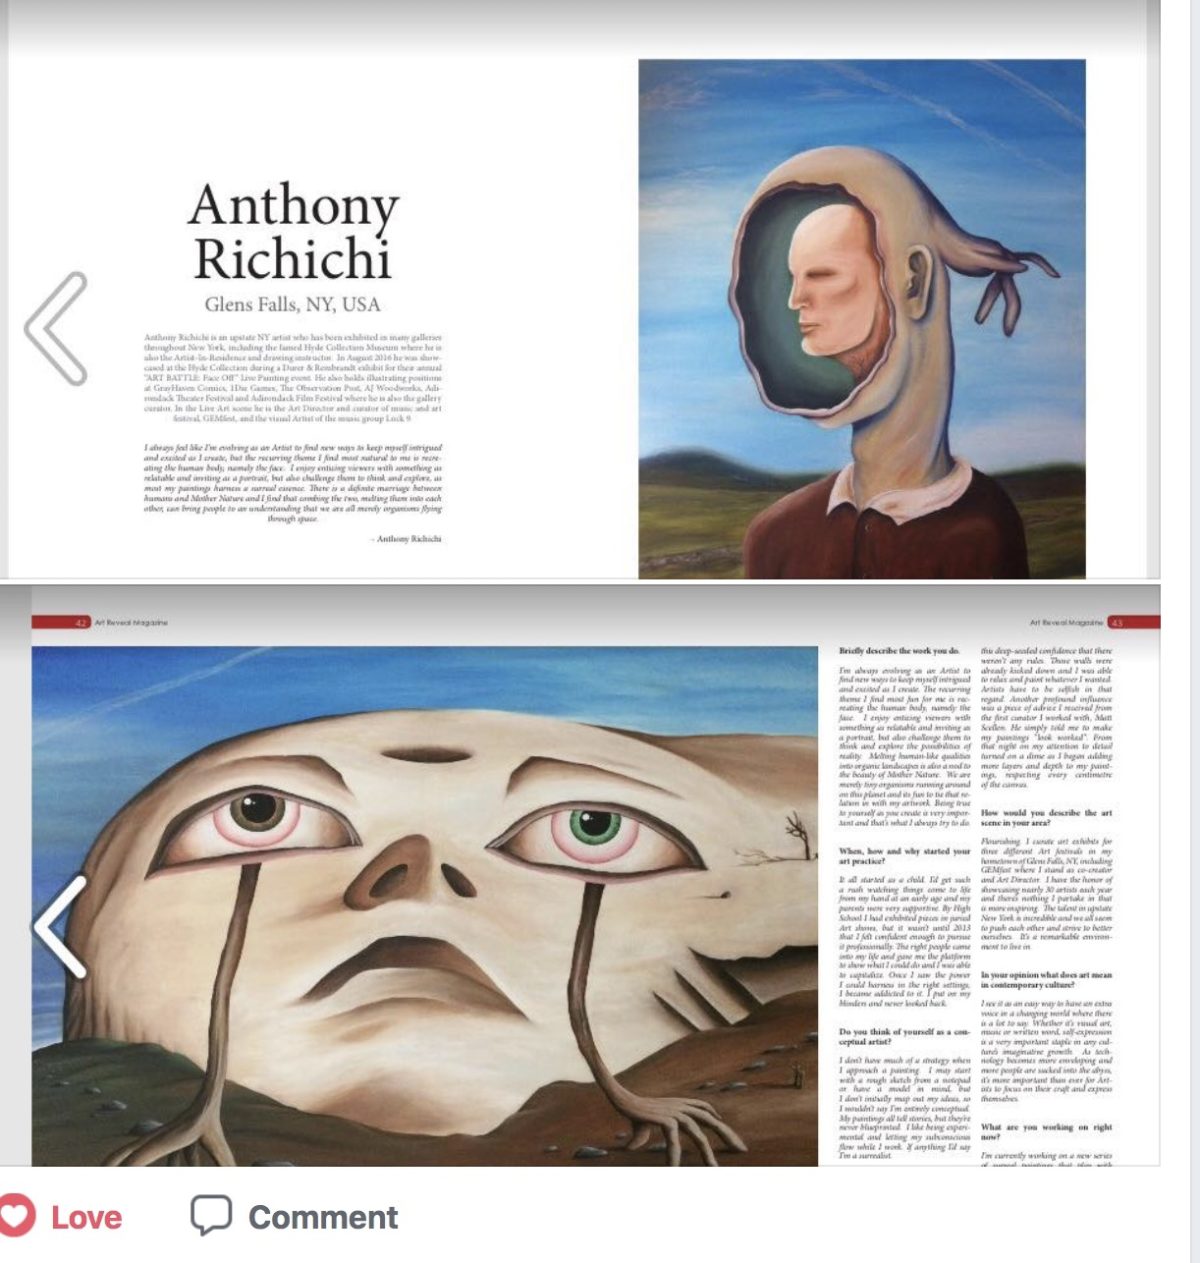 Anthony Richichi was featured in Art Reveal Magazine